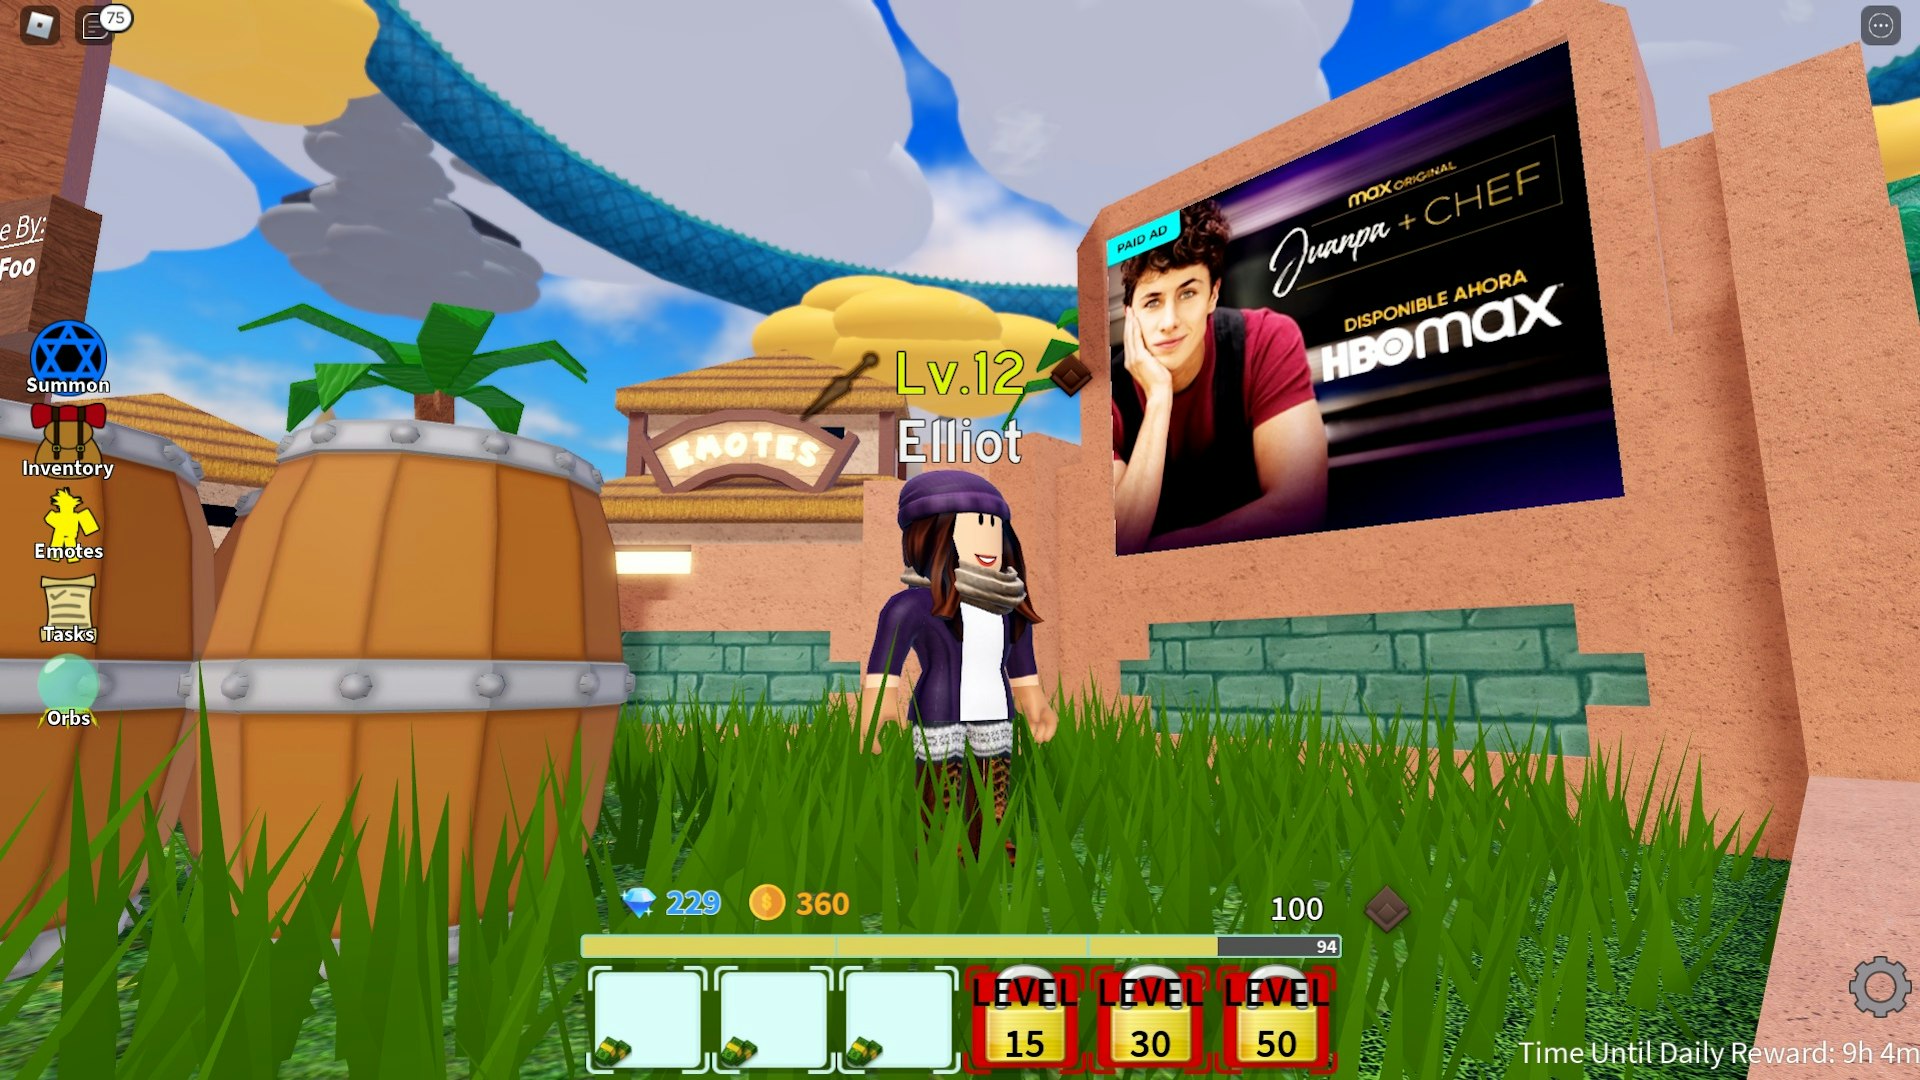 Anzu teams up with Roblox creators for in-game ads